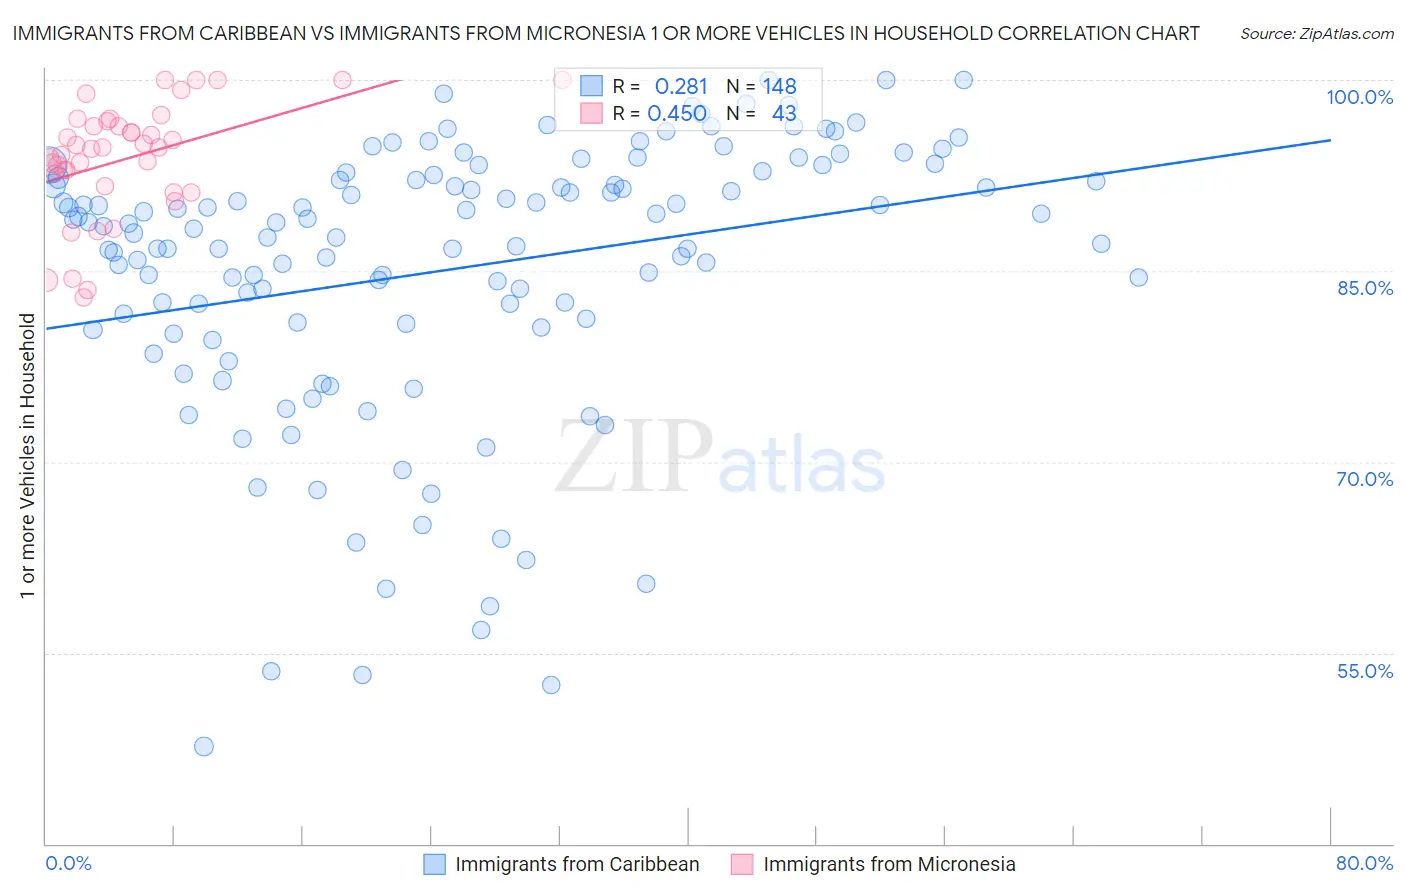 Immigrants from Caribbean vs Immigrants from Micronesia 1 or more Vehicles in Household